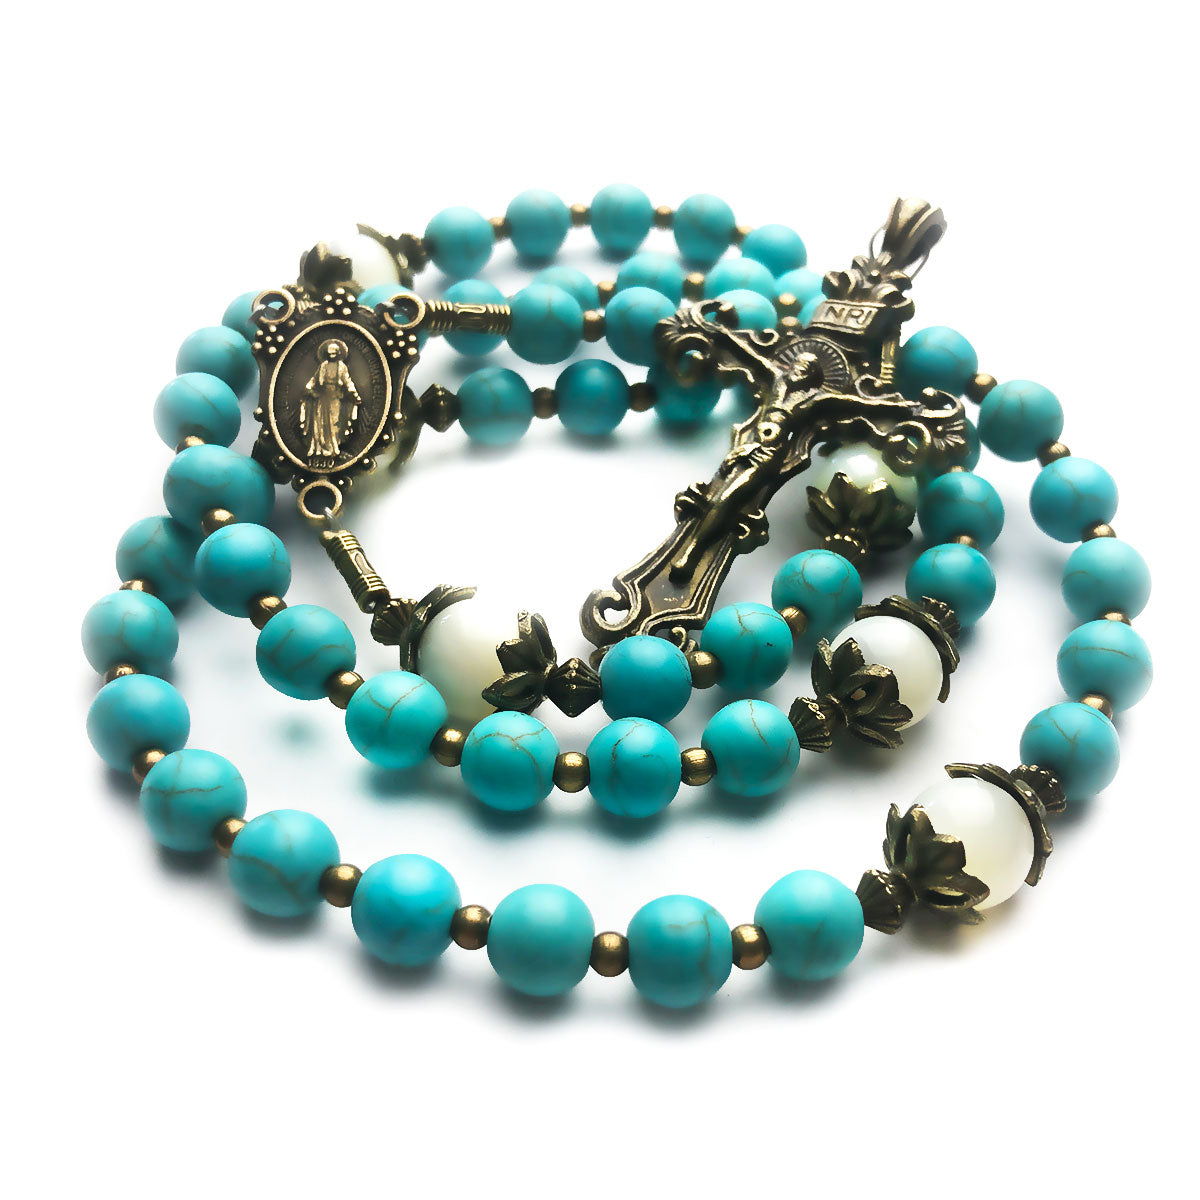 Turquoise and Mother of Pearl Stone Rosary With Miraculous Medal by Catholic Heirlooms - Confirmation - Holy Communion Gift - Rosary Necklace